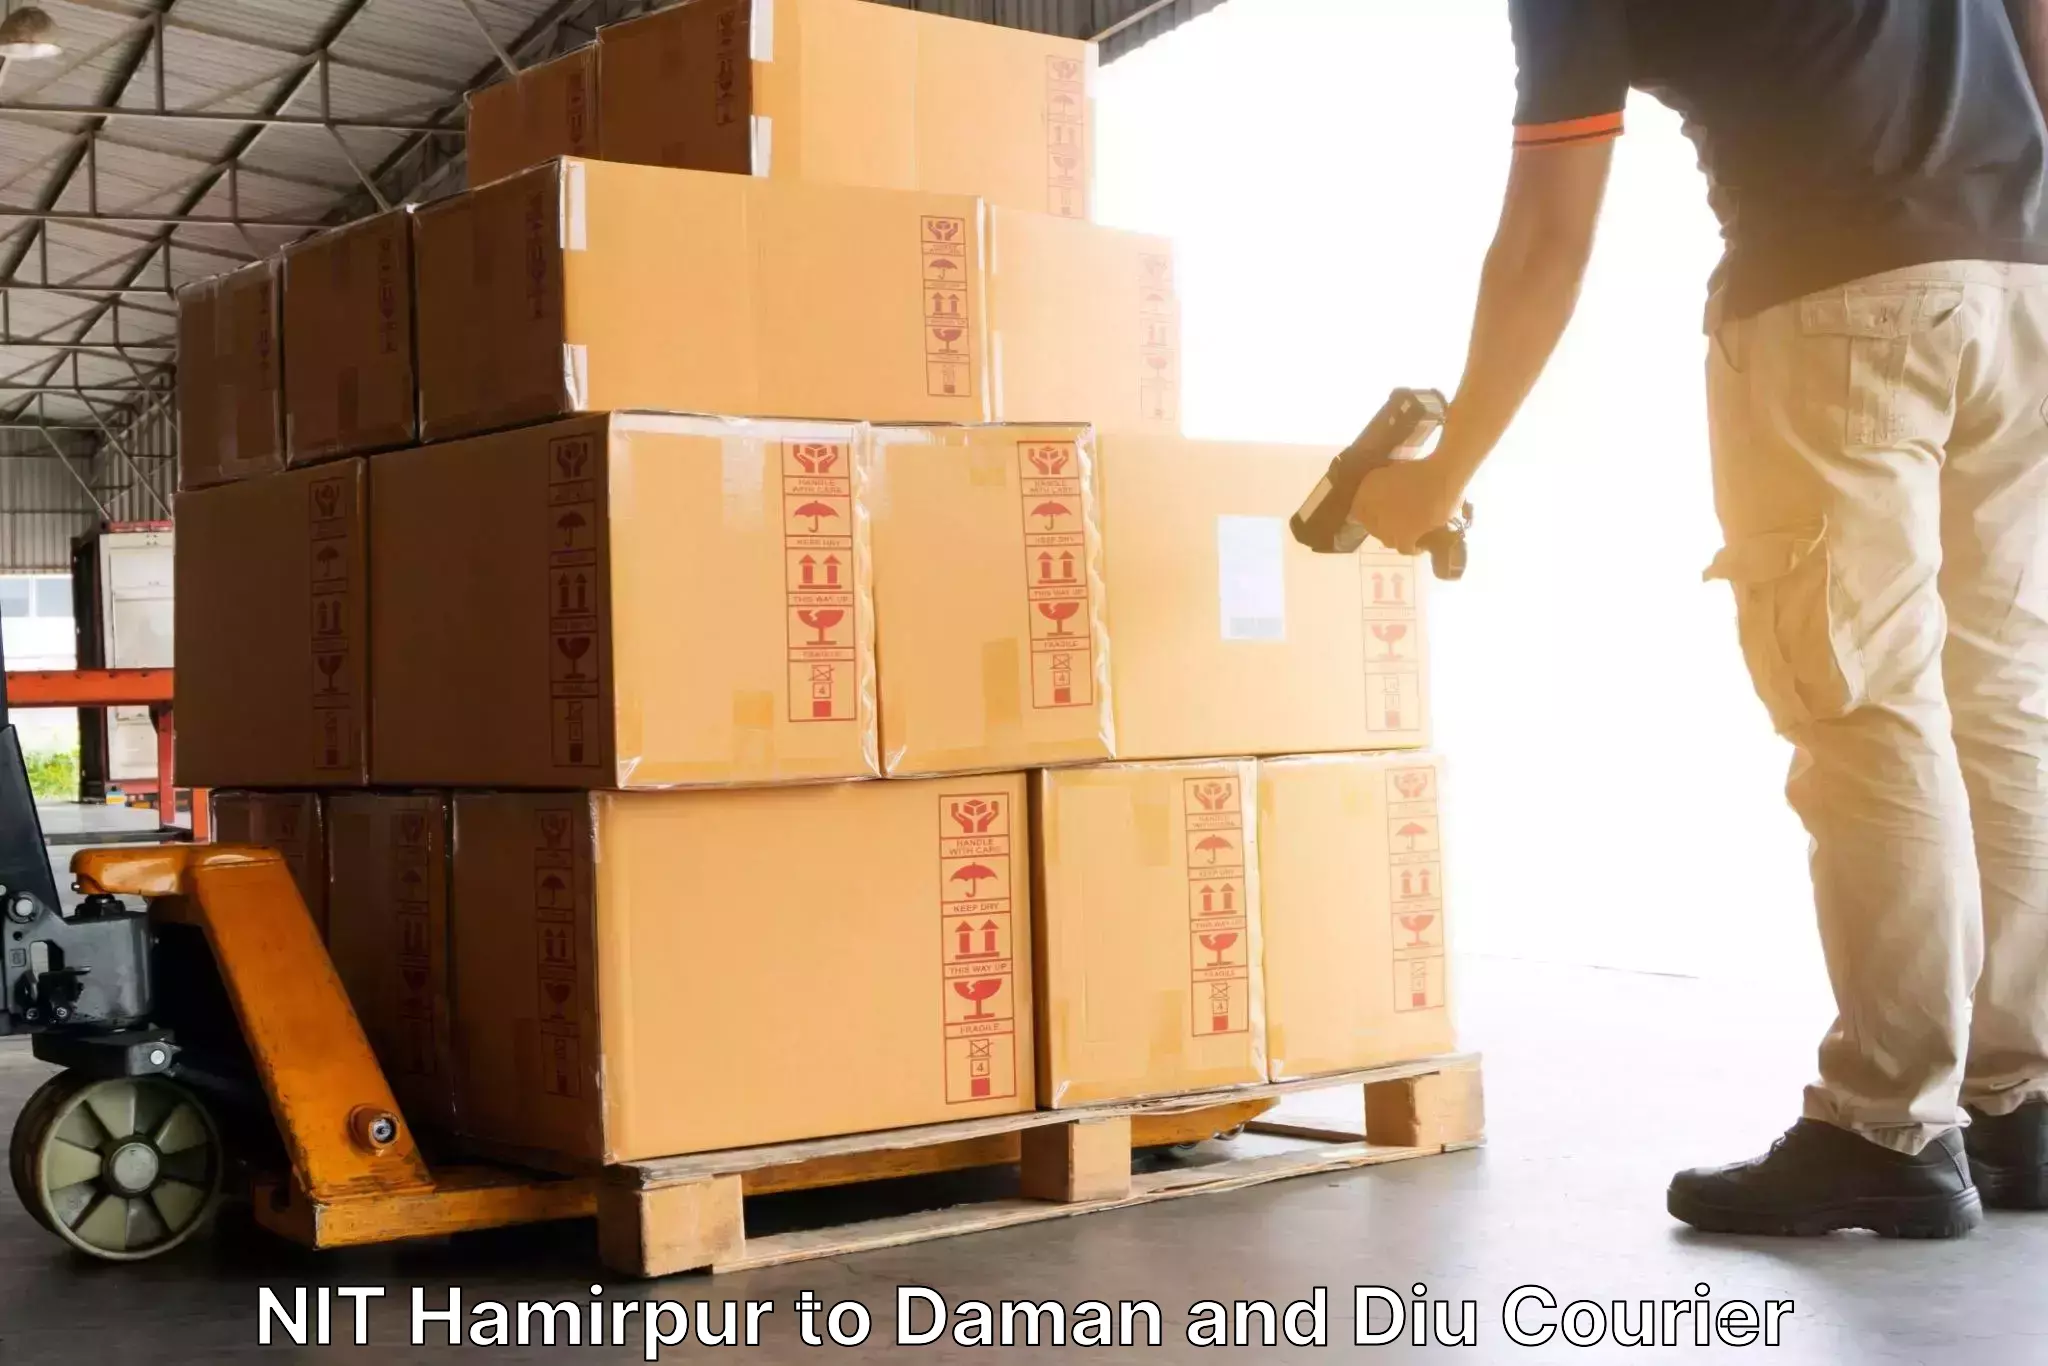 Multi-service courier options NIT Hamirpur to Diu